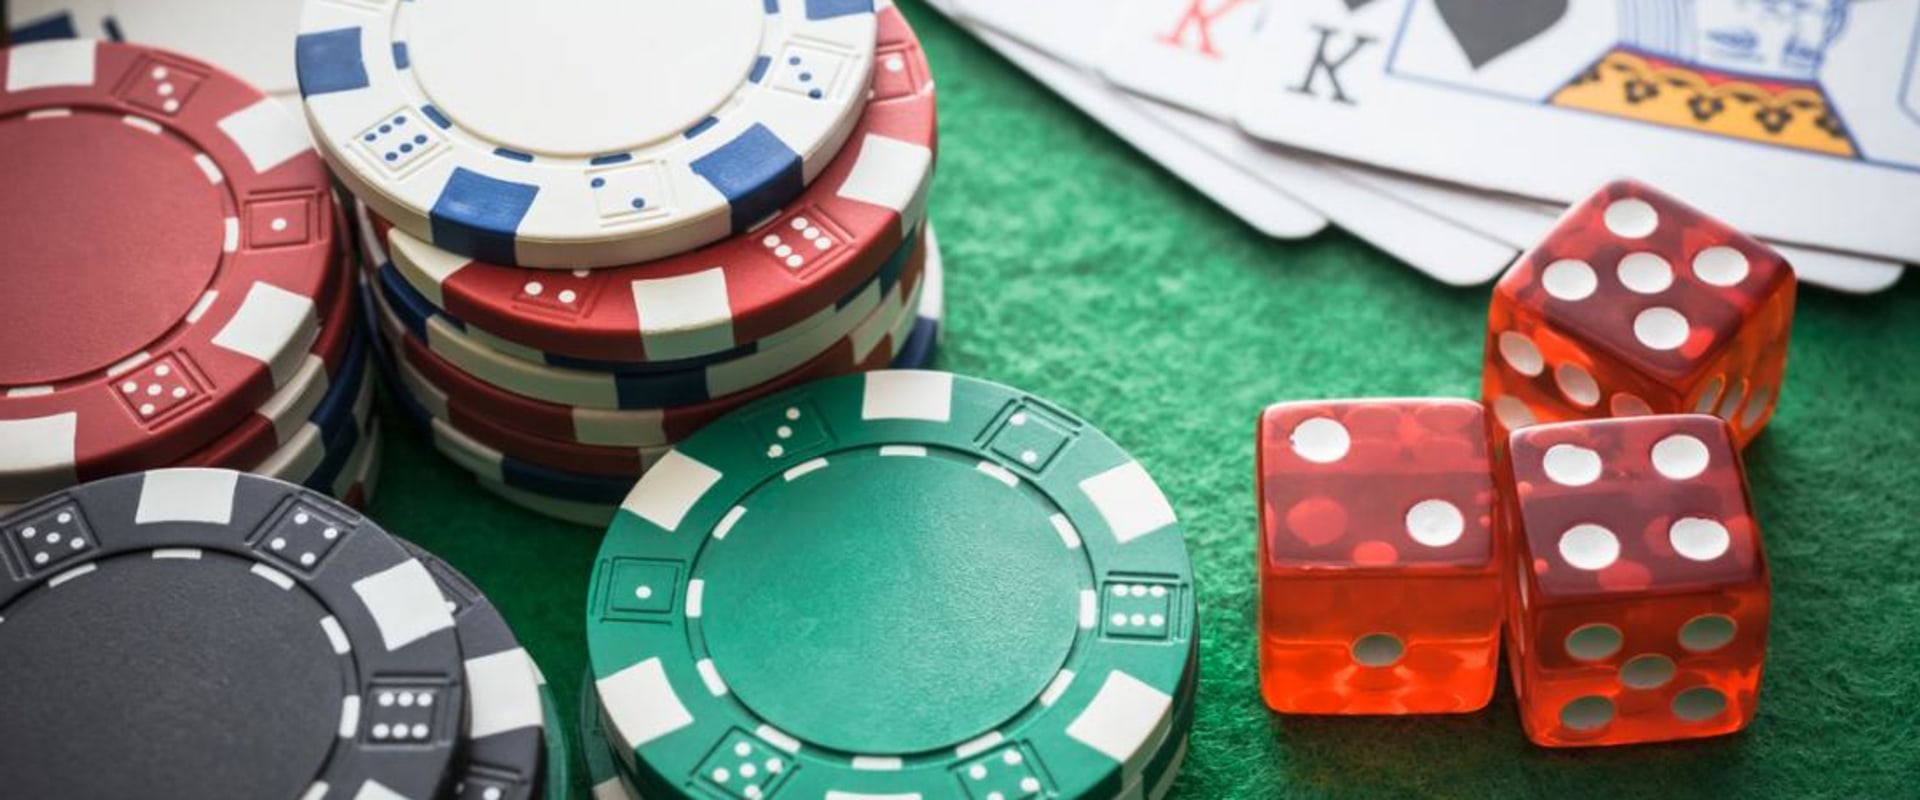 Compulsive Gambling: What You Need to Know